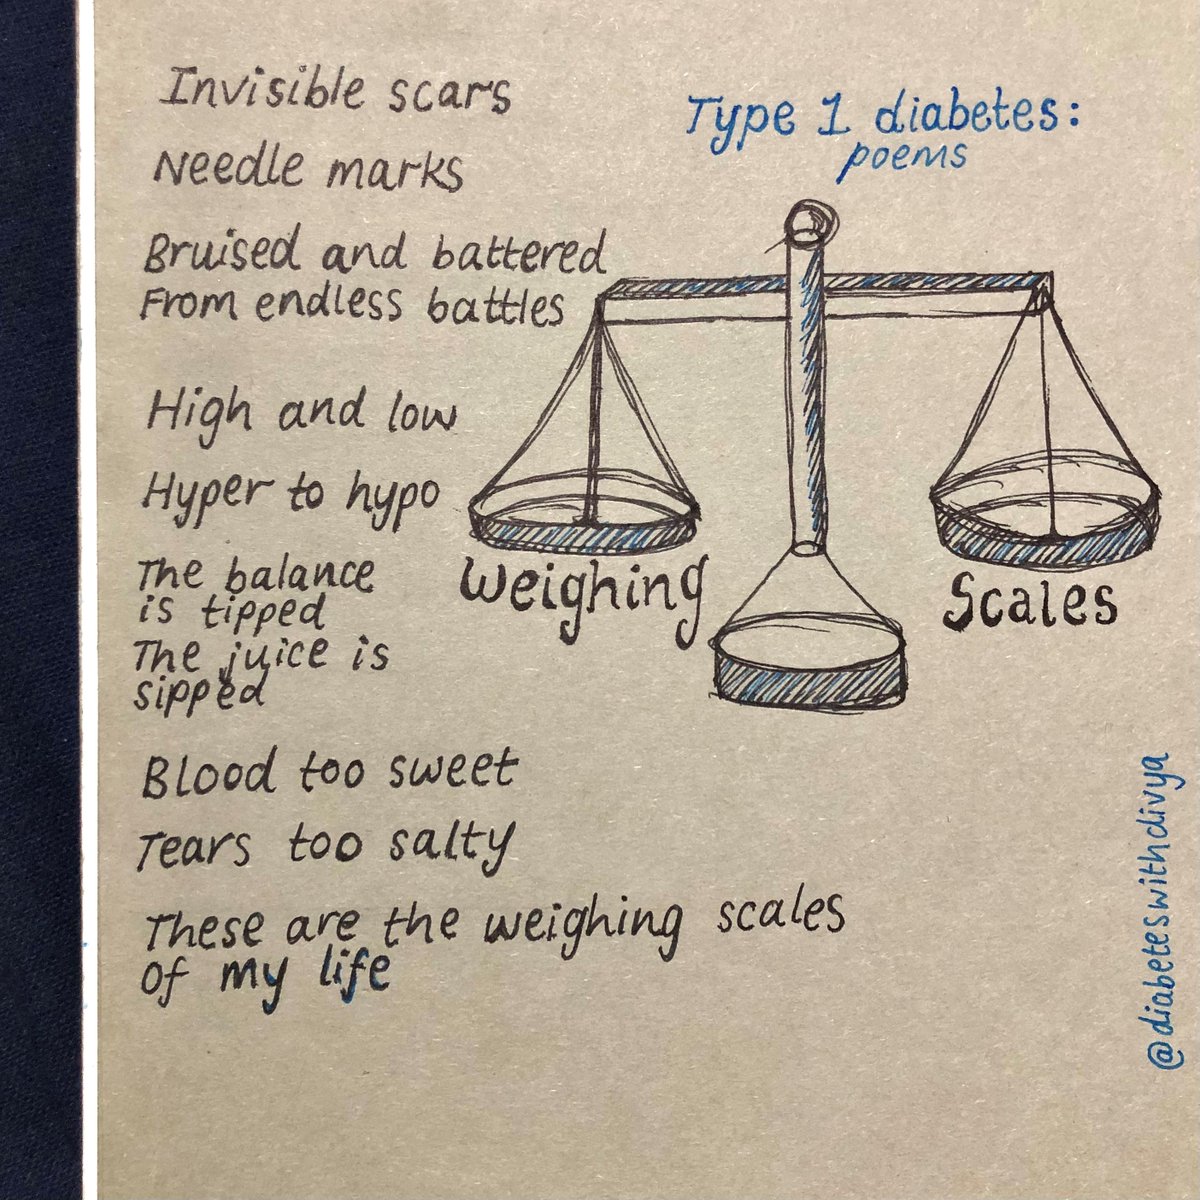 In celebration of Mental Health Awareness Week, our local Young Leader Divya has shared some beautiful poetry about the impact of diabetes on her mental health.